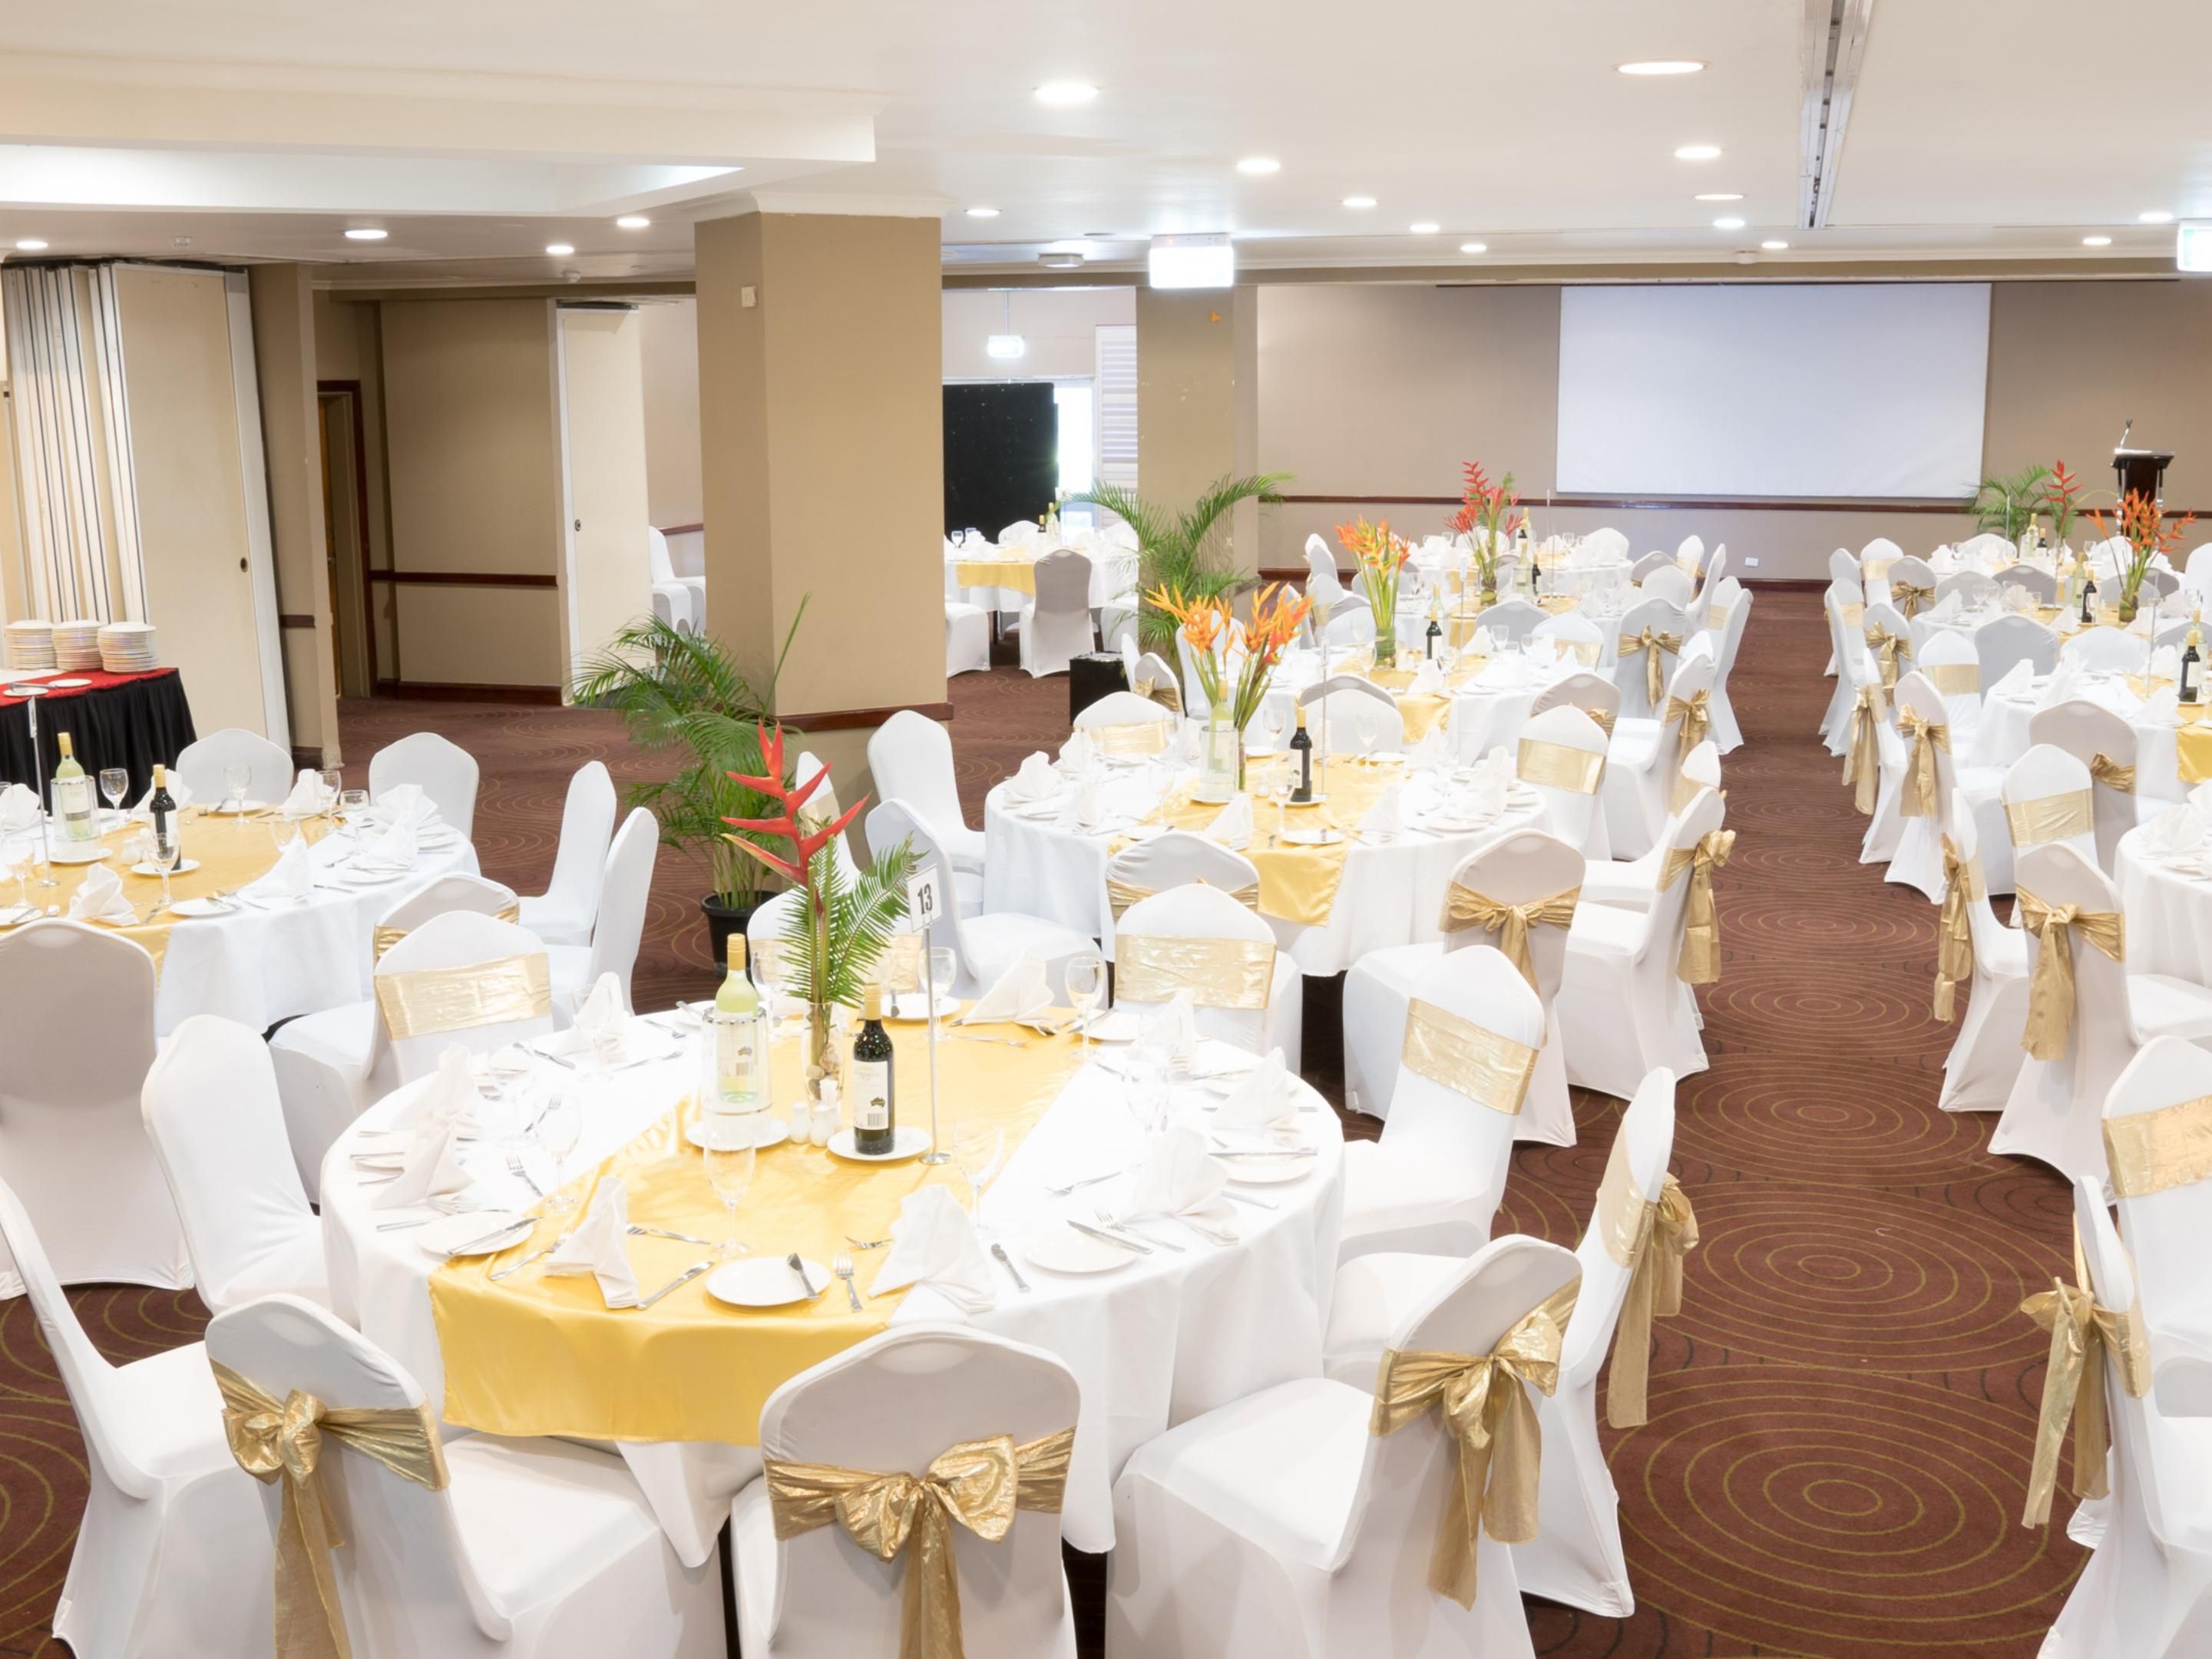 Whether you’re planning a small meeting, conference, training seminar, corporate launch, cocktail party or team-building event, our conference and events team will make sure it’s a success.

For bookings or further package details, get in touch with our Conference and Events Manager at email anna.naime@ihg.com or call +675 3032261.